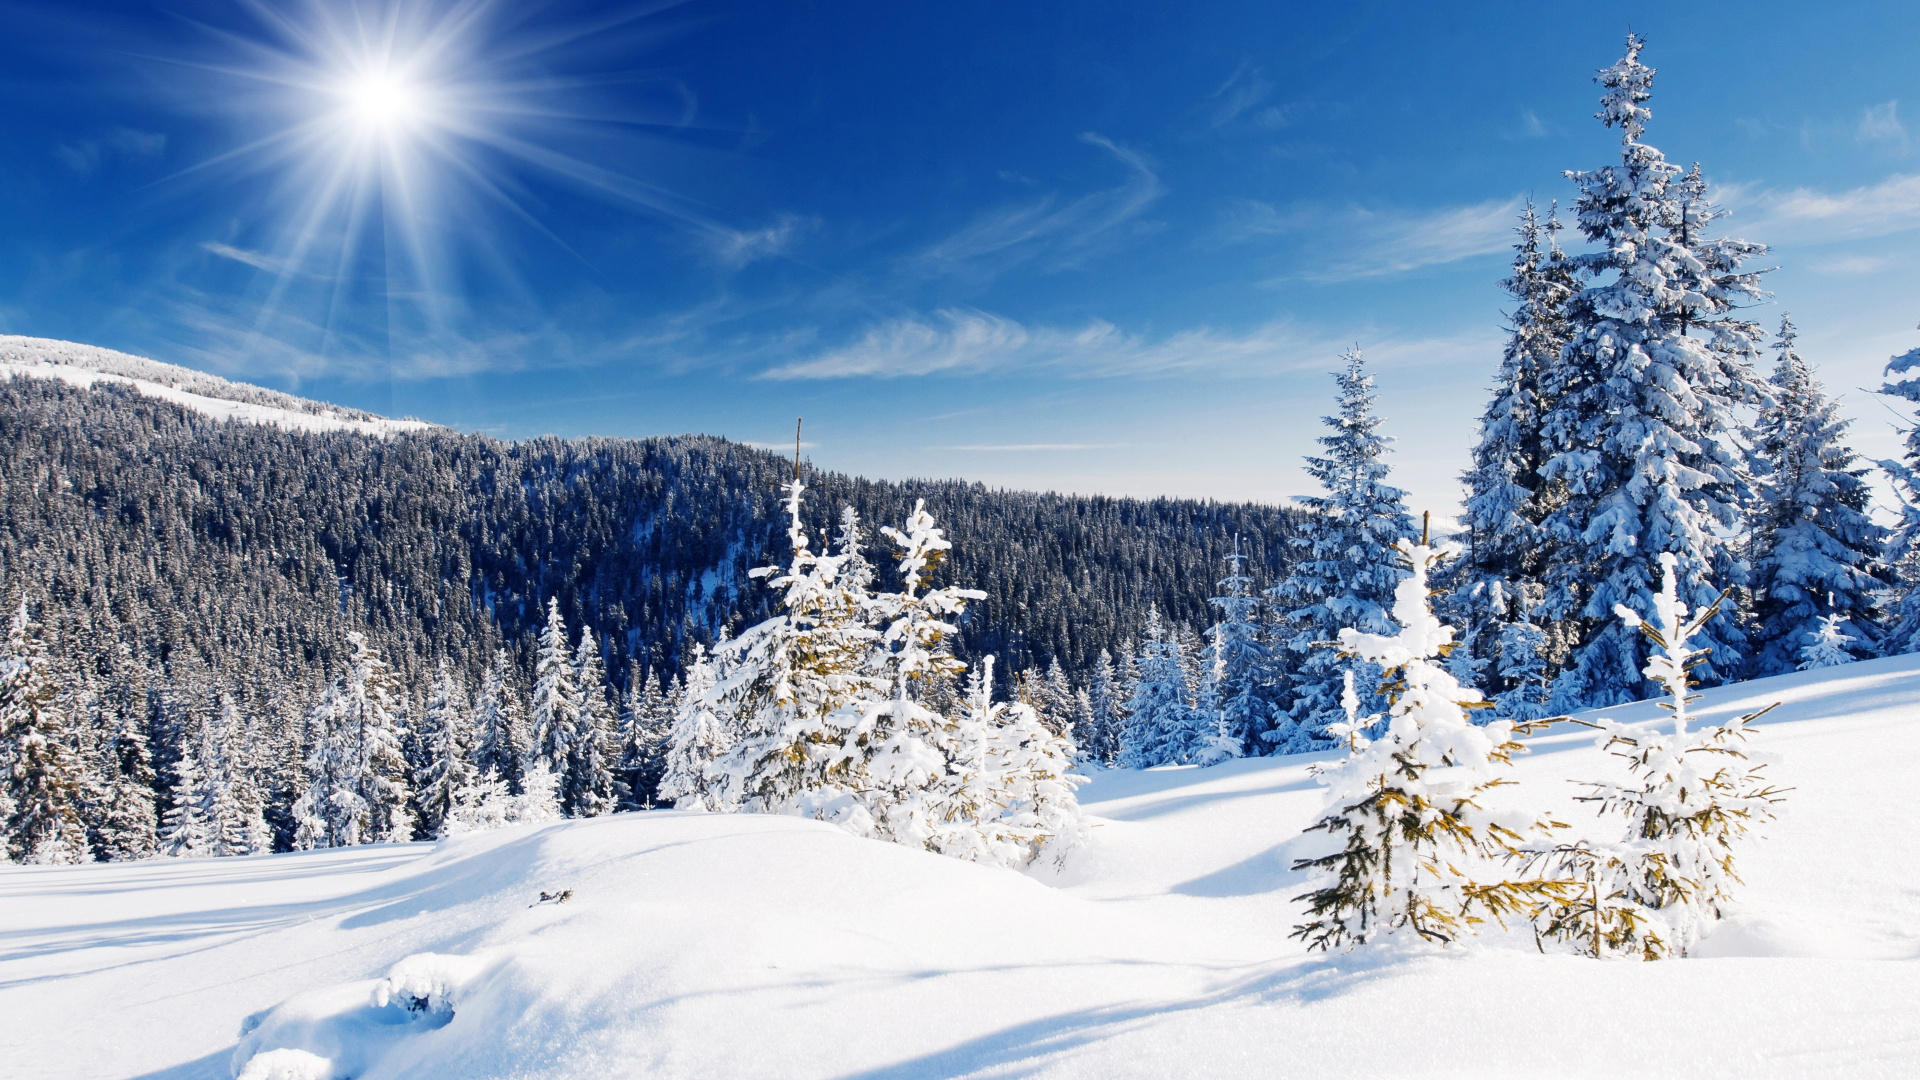 Snow Covered Trees Under Blue Sky During Daytime. Wallpaper in 1920x1080 Resolution